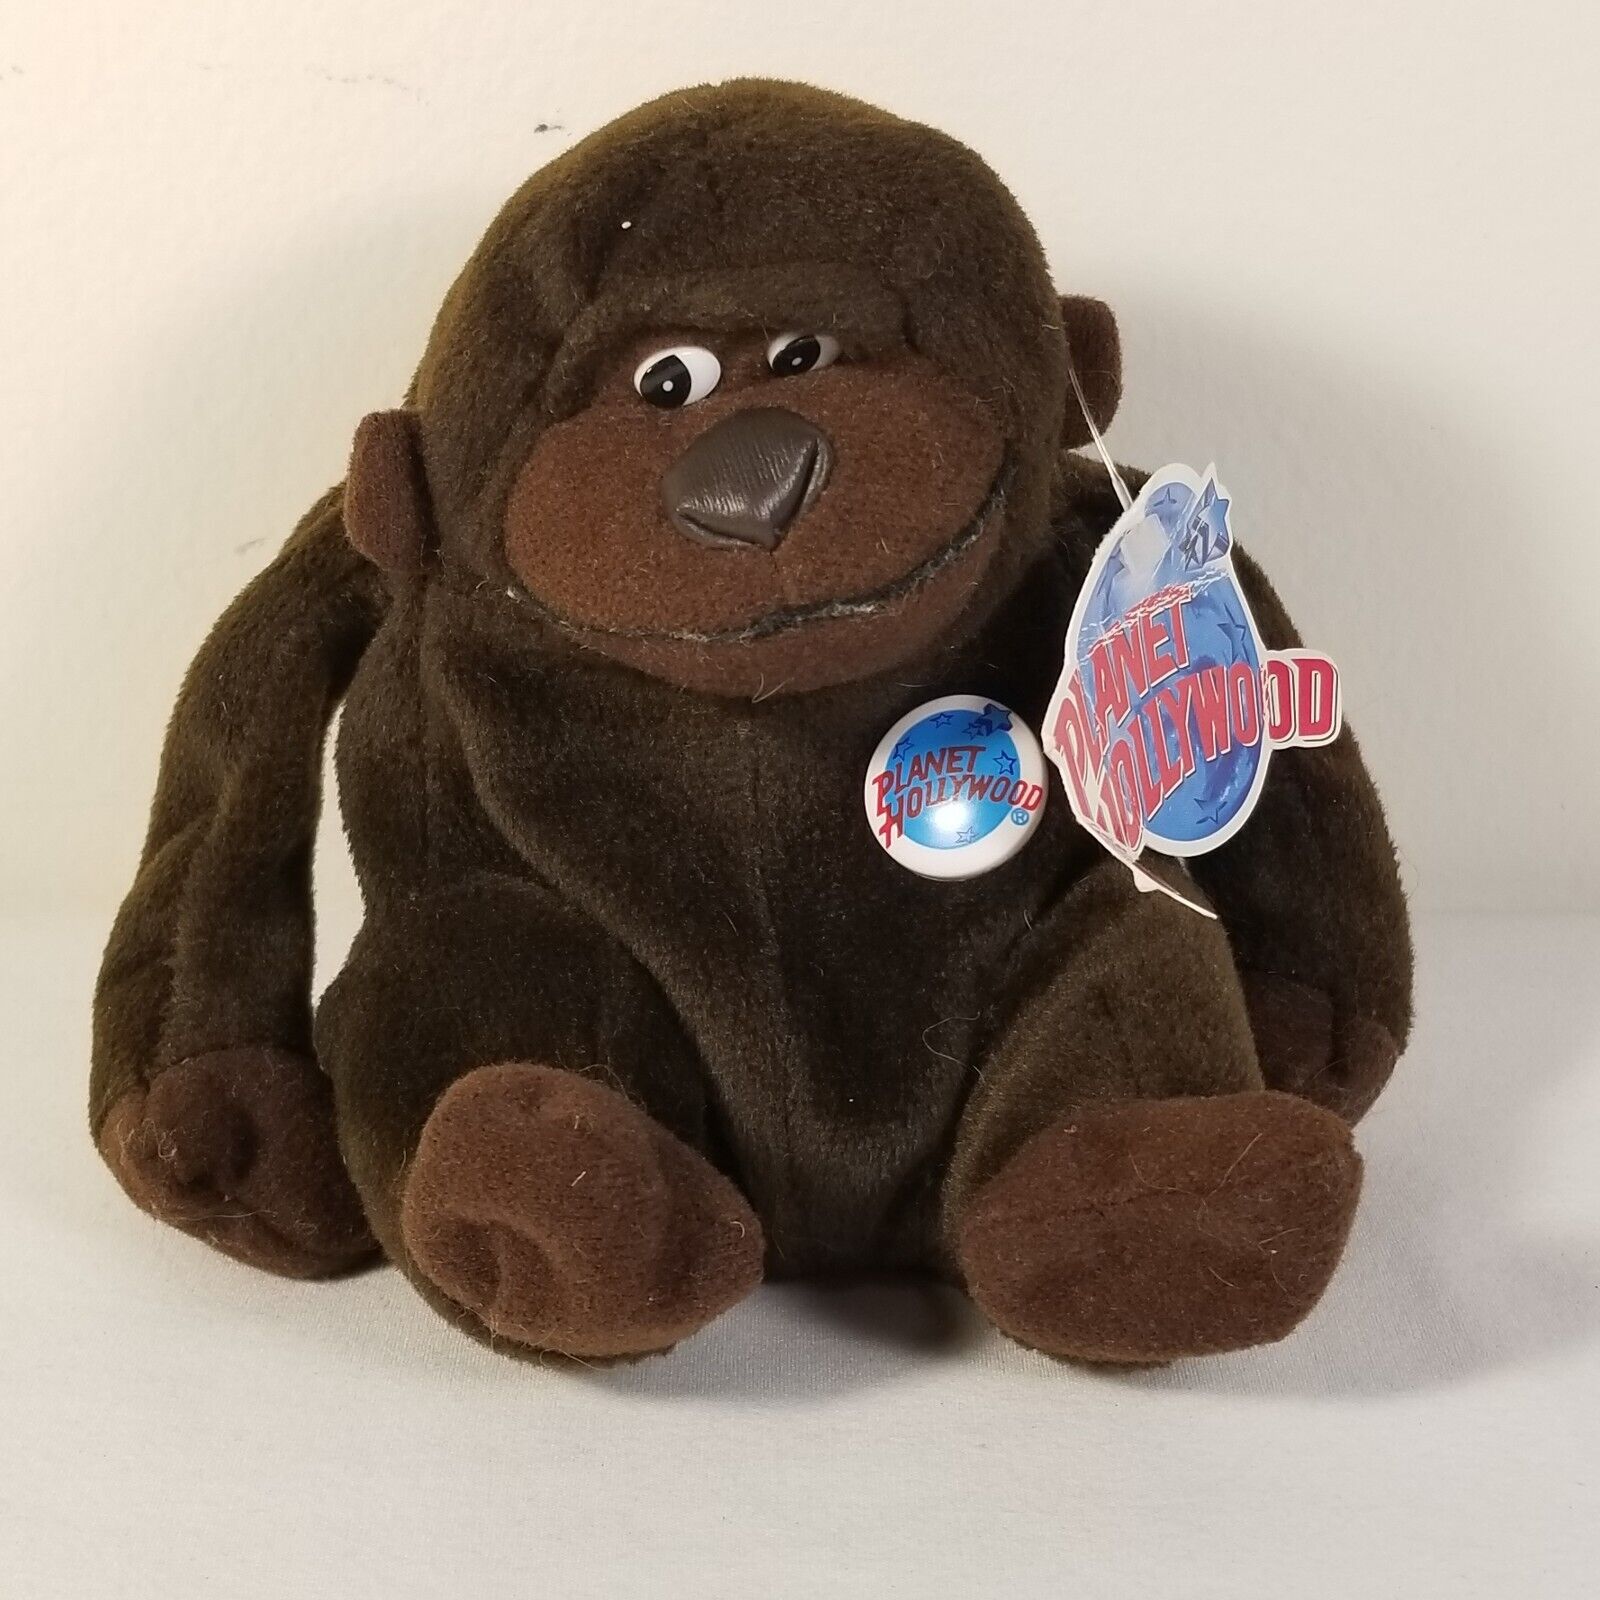 Planet Hollywood George Gorilla 4.5” Plush Bean Bag With Tags Vintage 1997